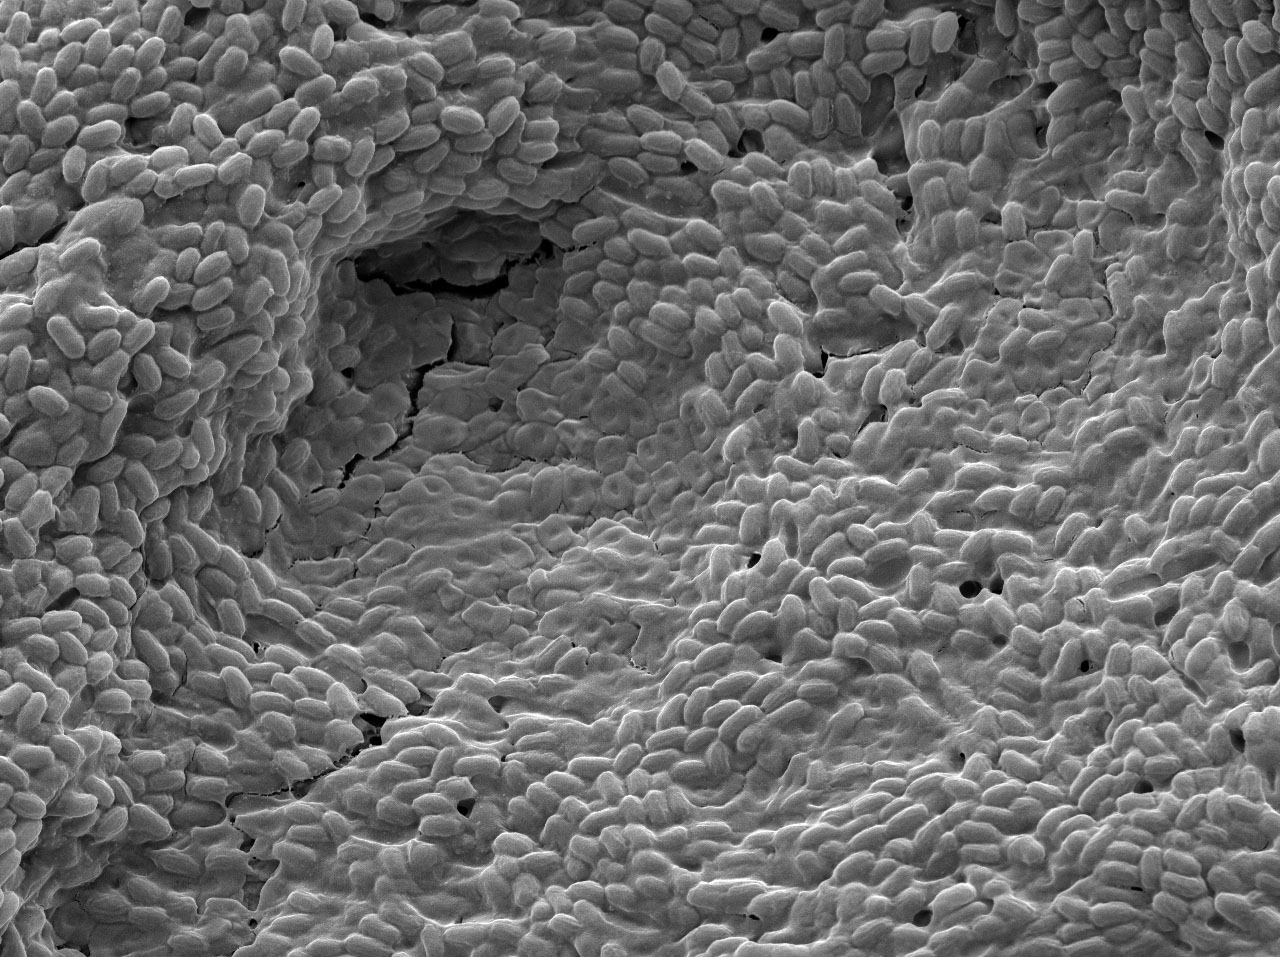 Black and white microscopic image that looks like a tunnel covered in cells.